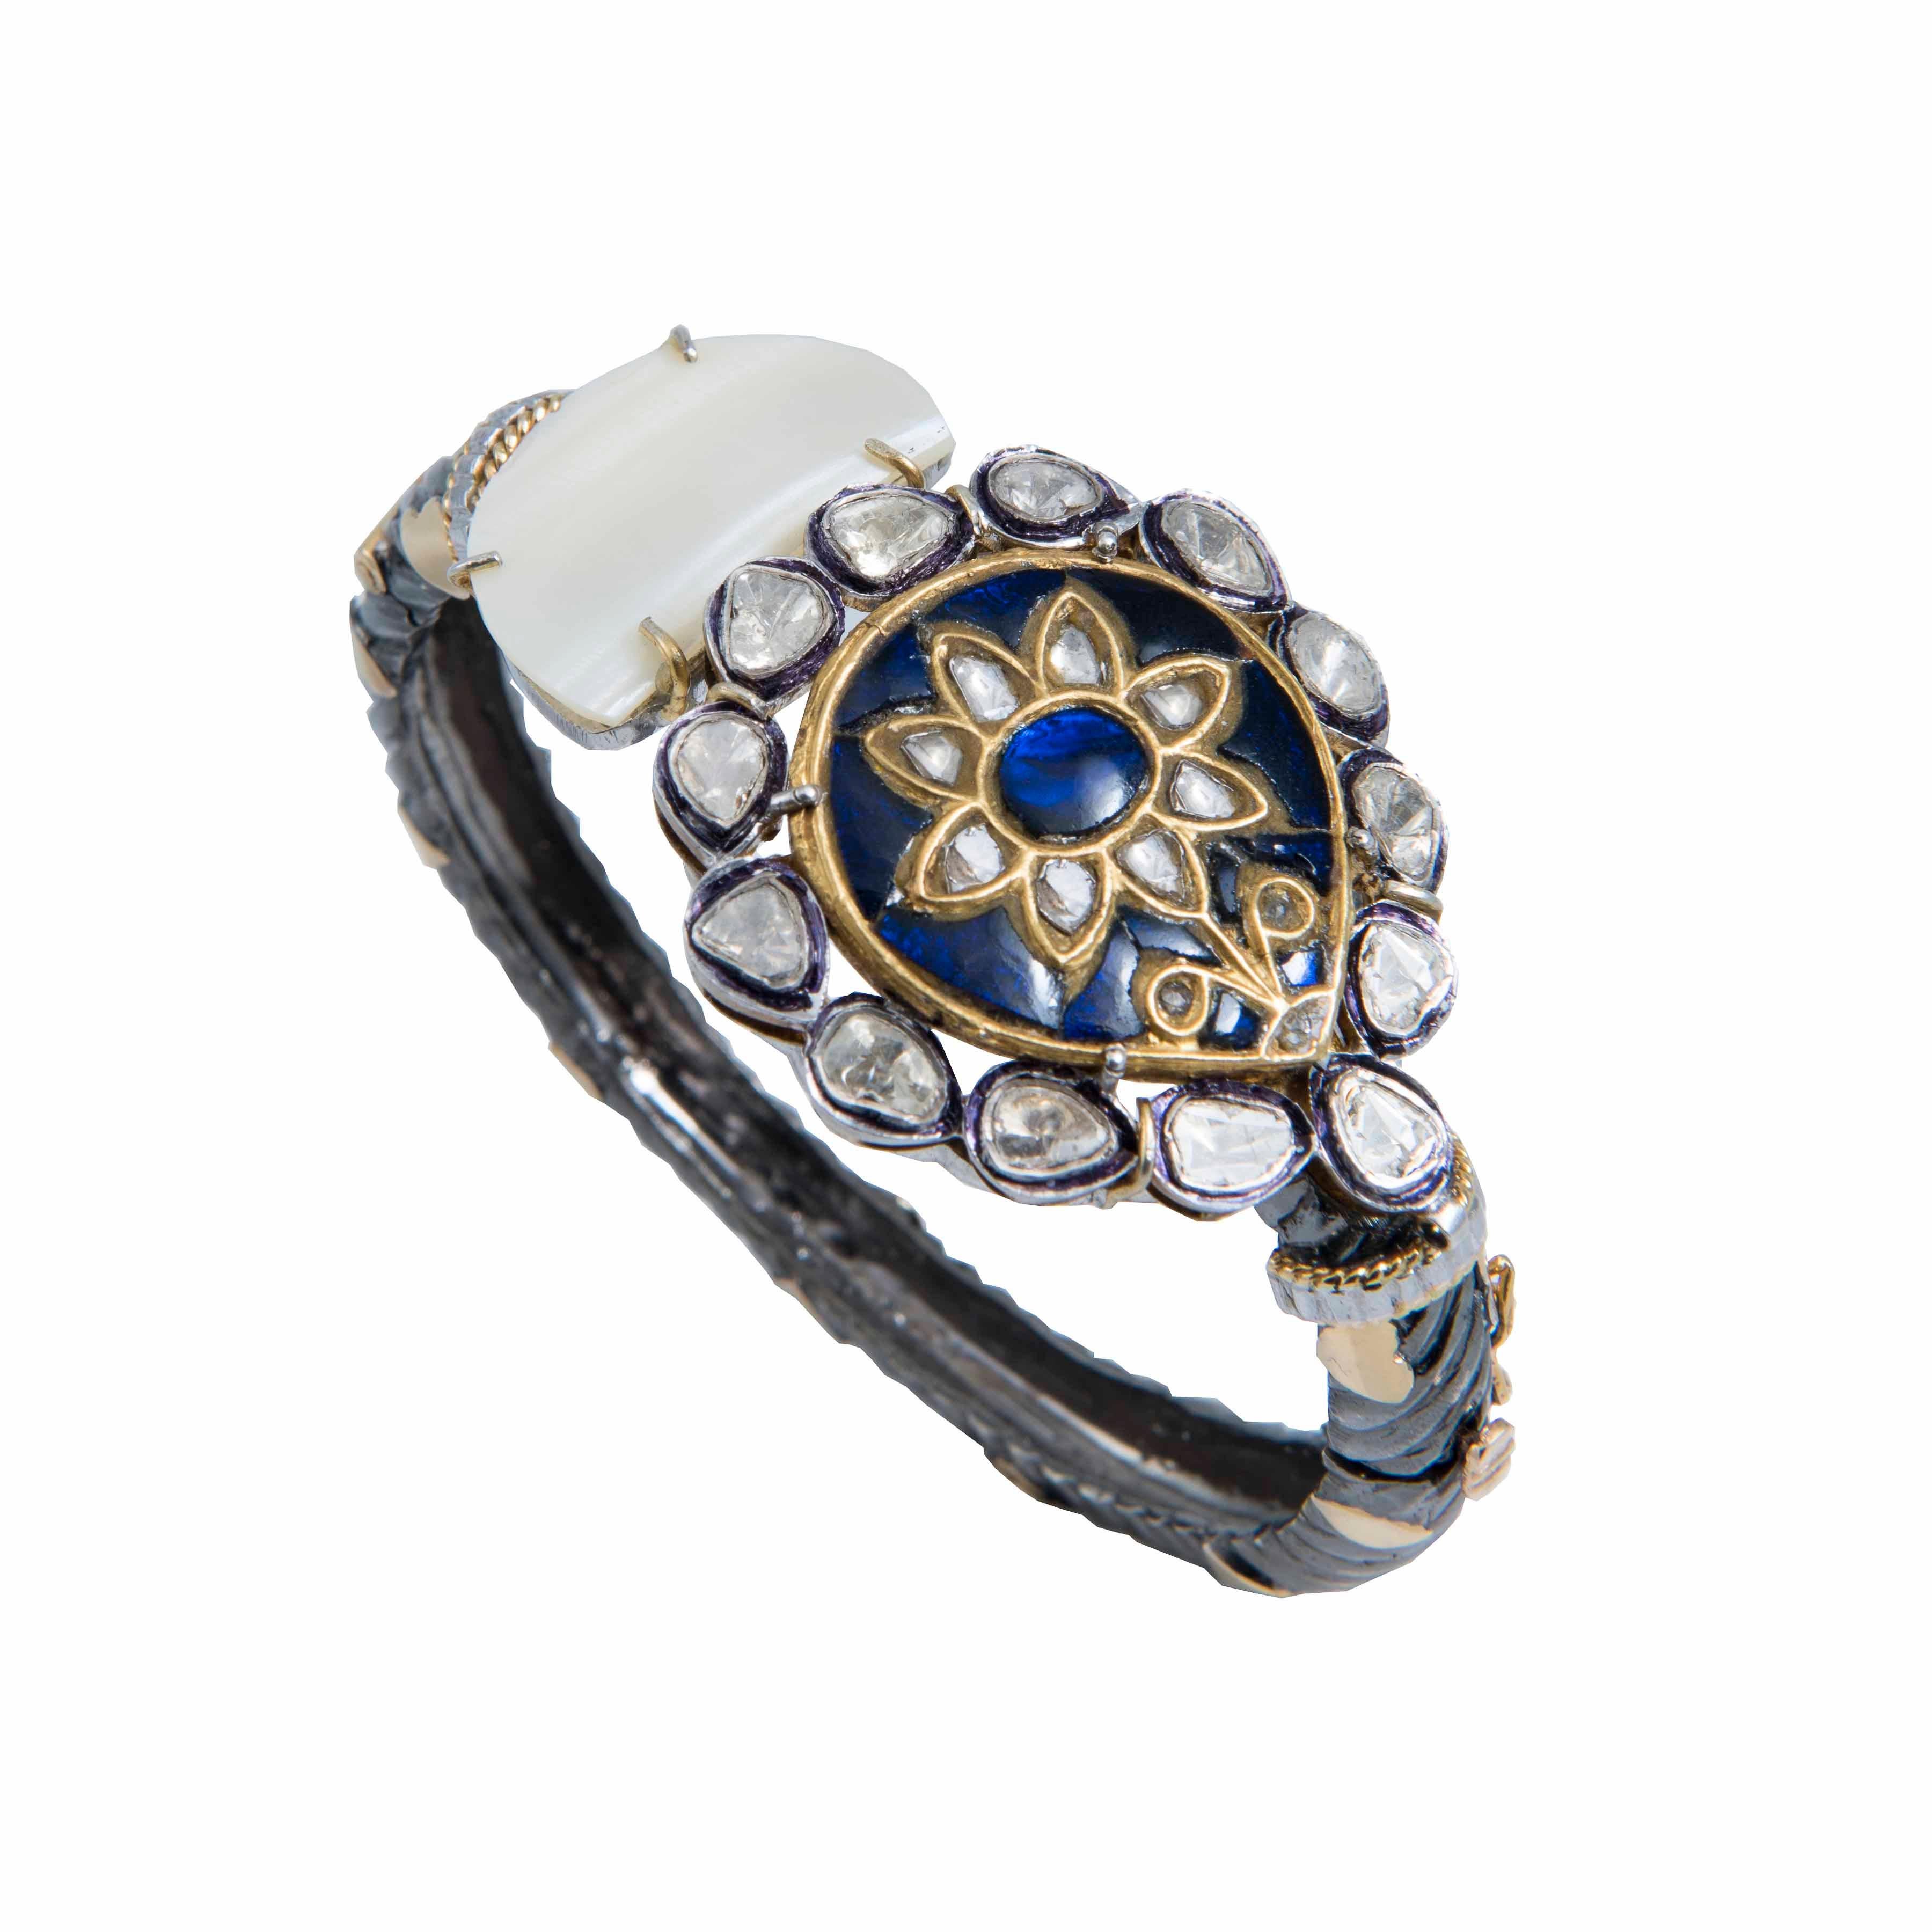 This limited edition bracelet from Iconic series of the brand, showcases a flirty interplay of black chrome plated pure silver band with 18k gold work on it, and a handcrafted blue iolite petal motif embellished with polkis (uncut diamonds) on the